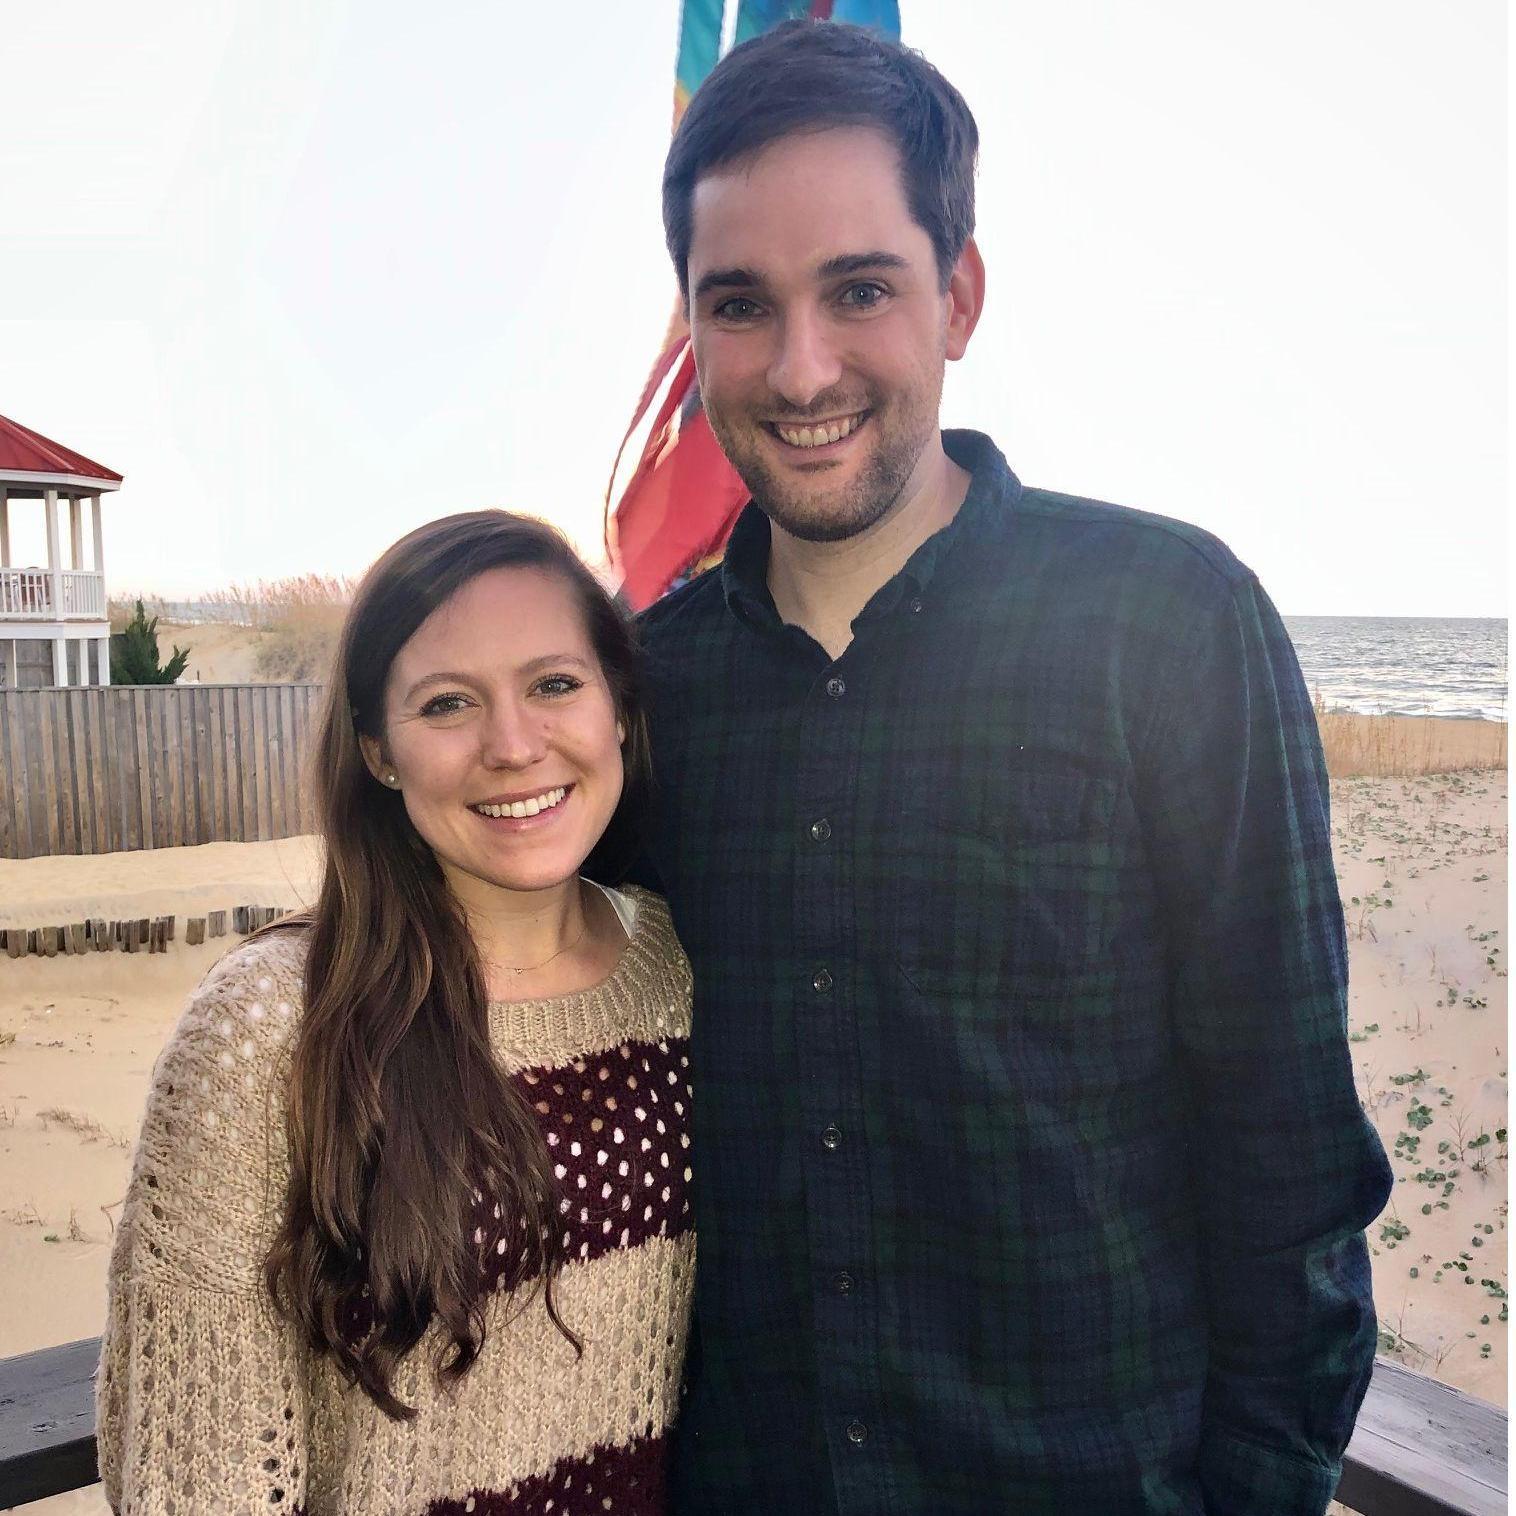 Our first Thanksgiving together in Sandbridge.